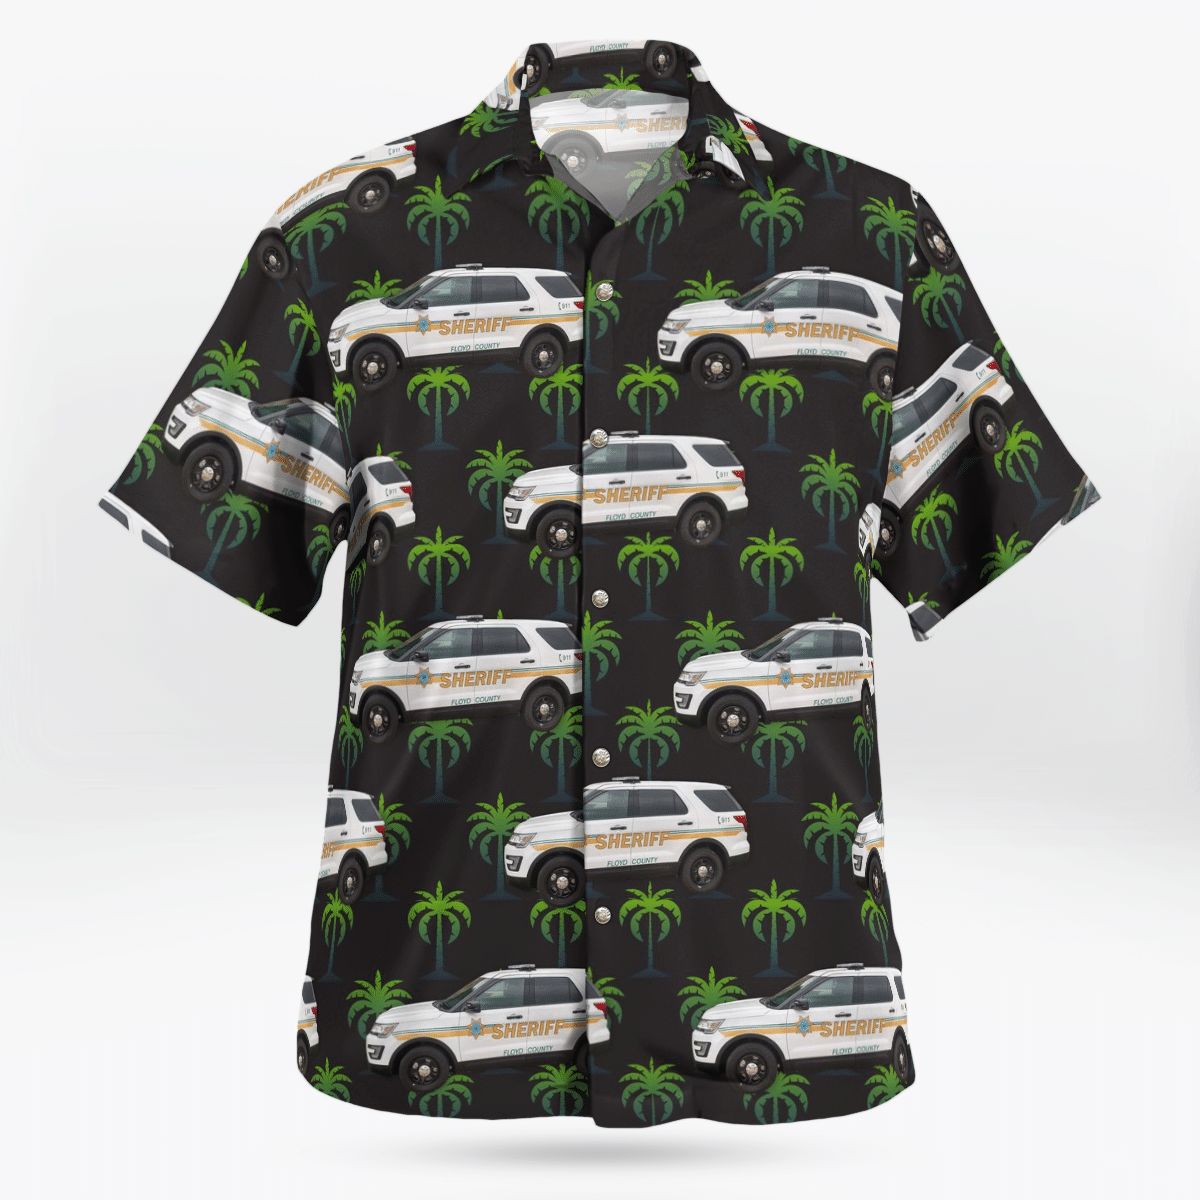 Hawaiian shirts never go out of style 179